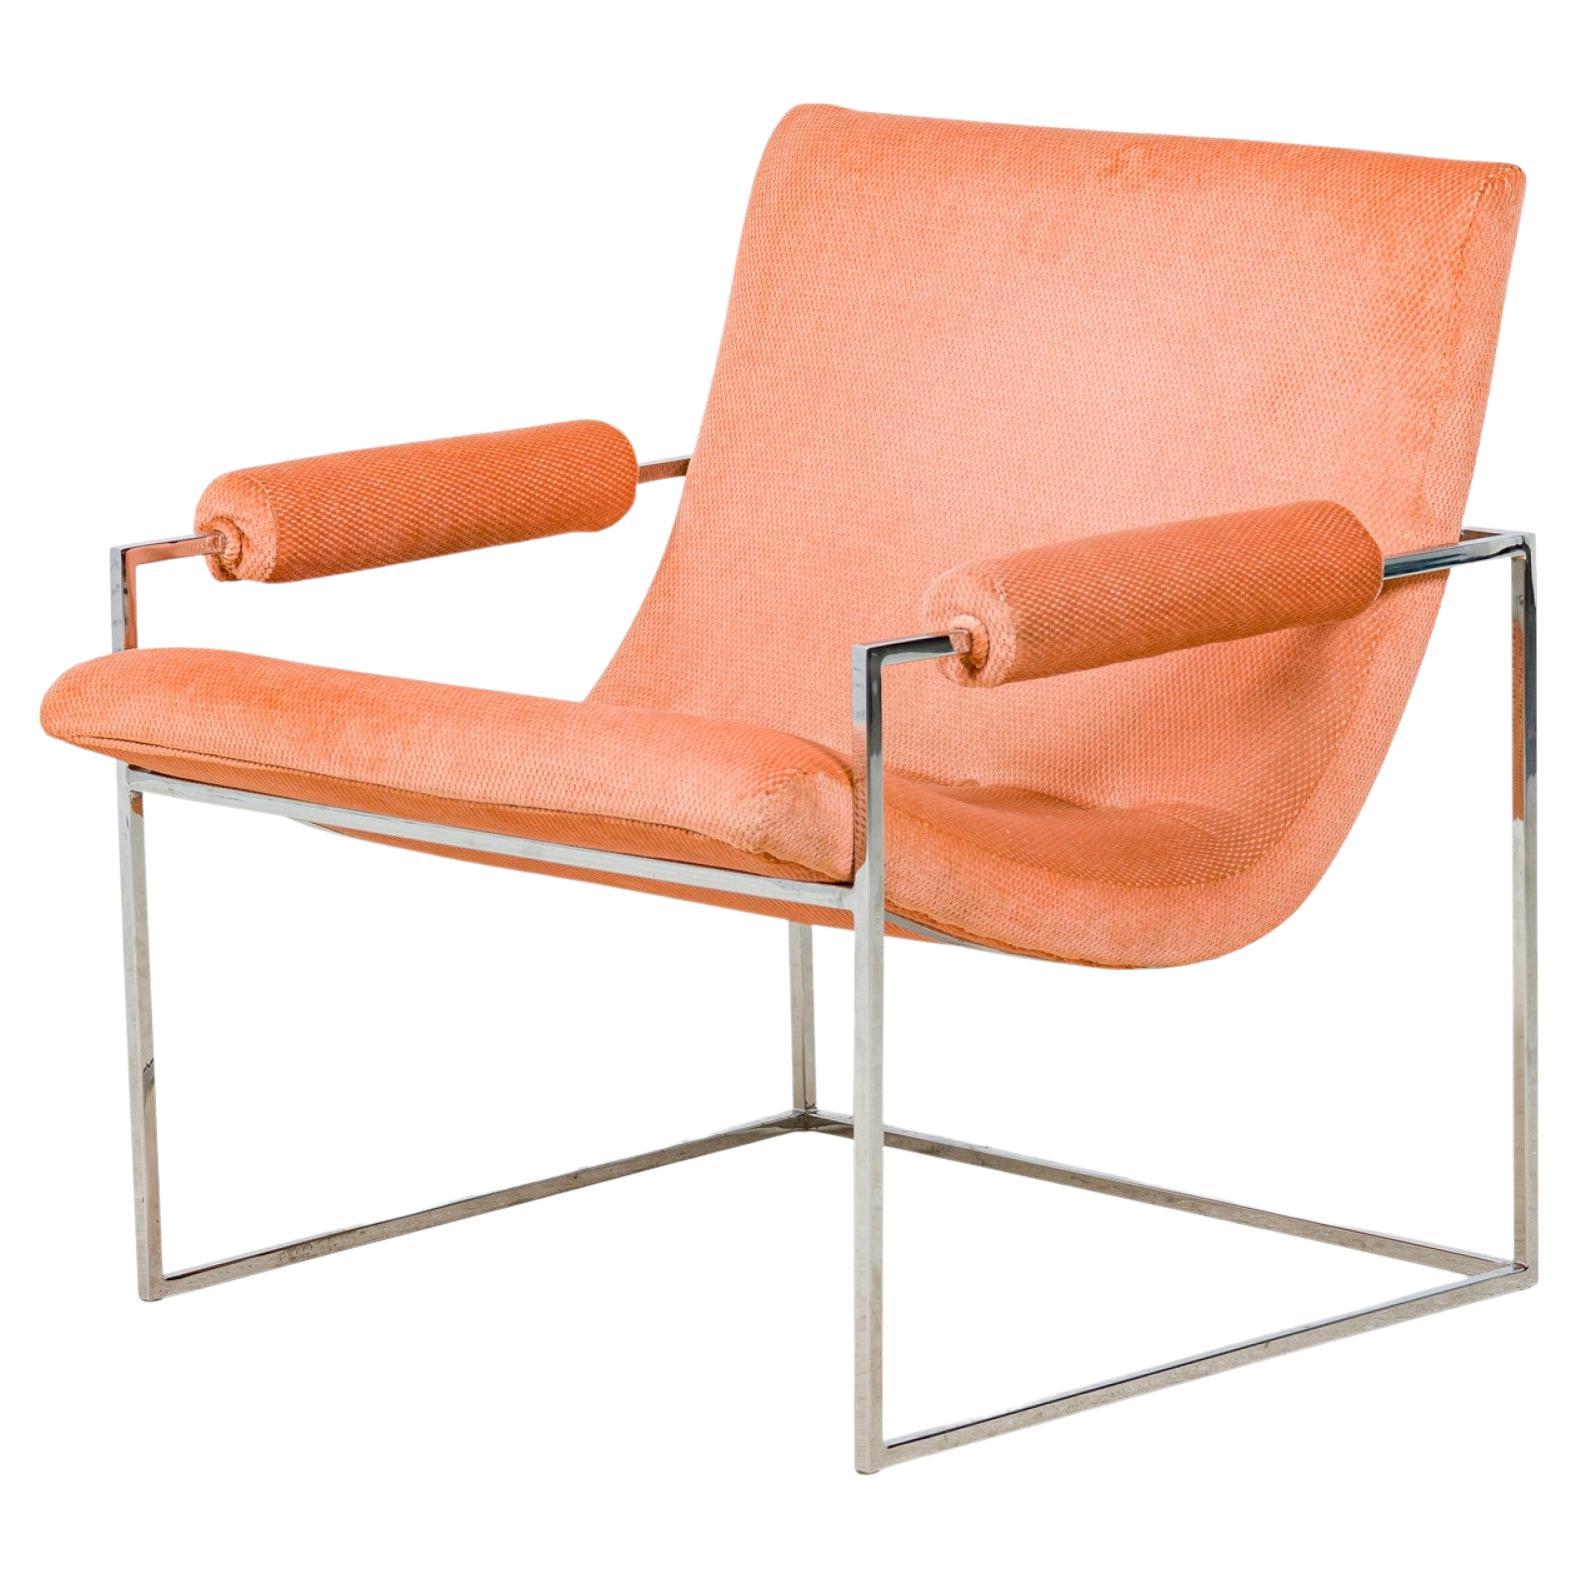 Milo Baughman for Thayer Coggin Coral Upholstered Scoop Lounge / Armchair